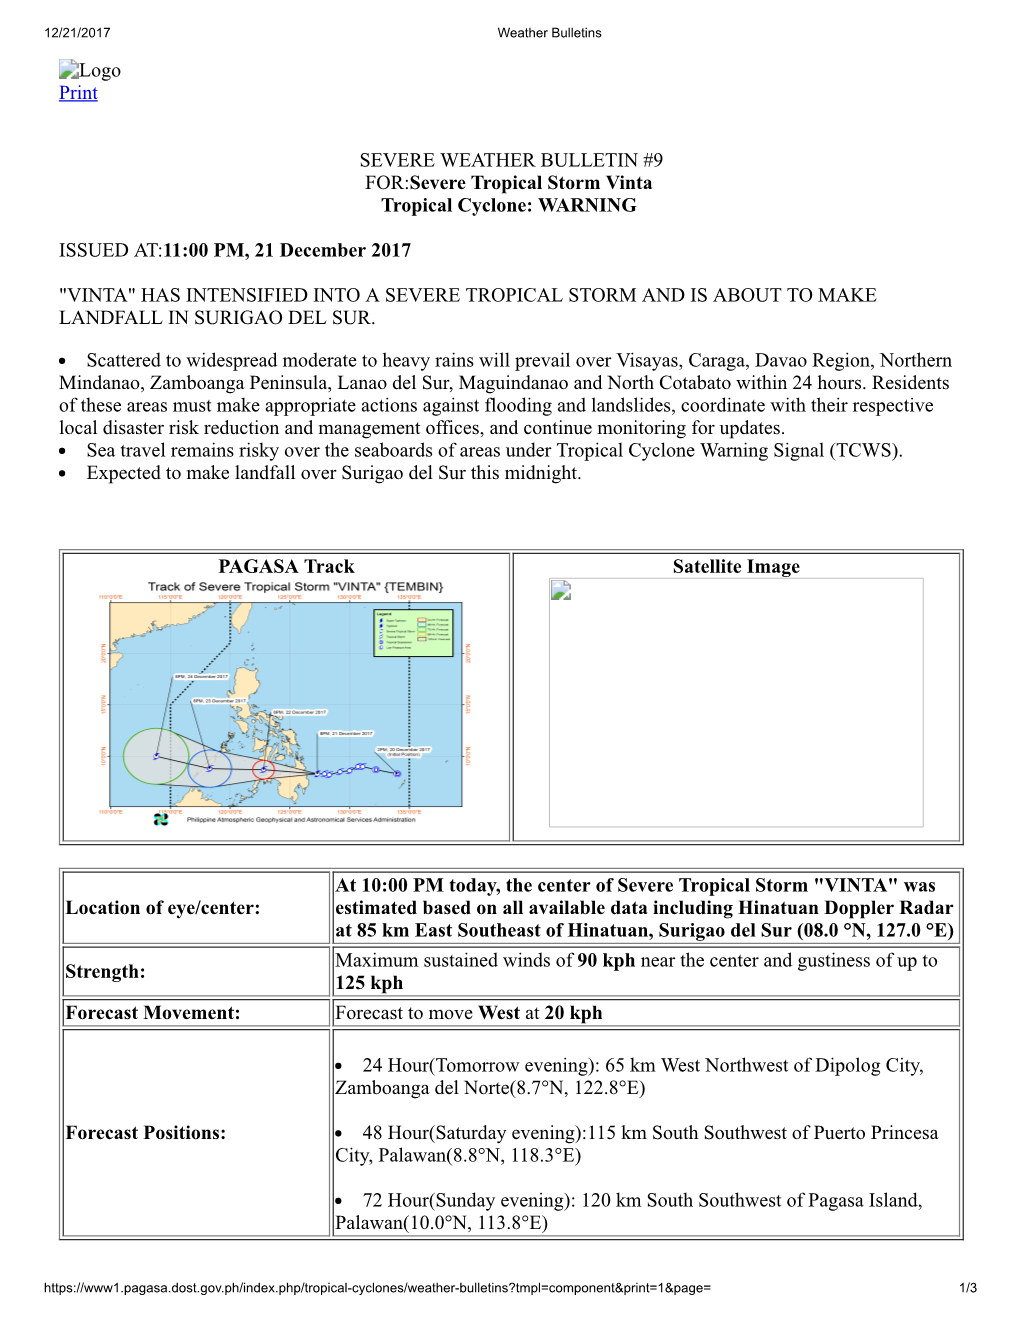 Logo Print SEVERE WEATHER BULLETIN #9 FOR:Severe Tropical Storm Vinta Tropical Cyclone